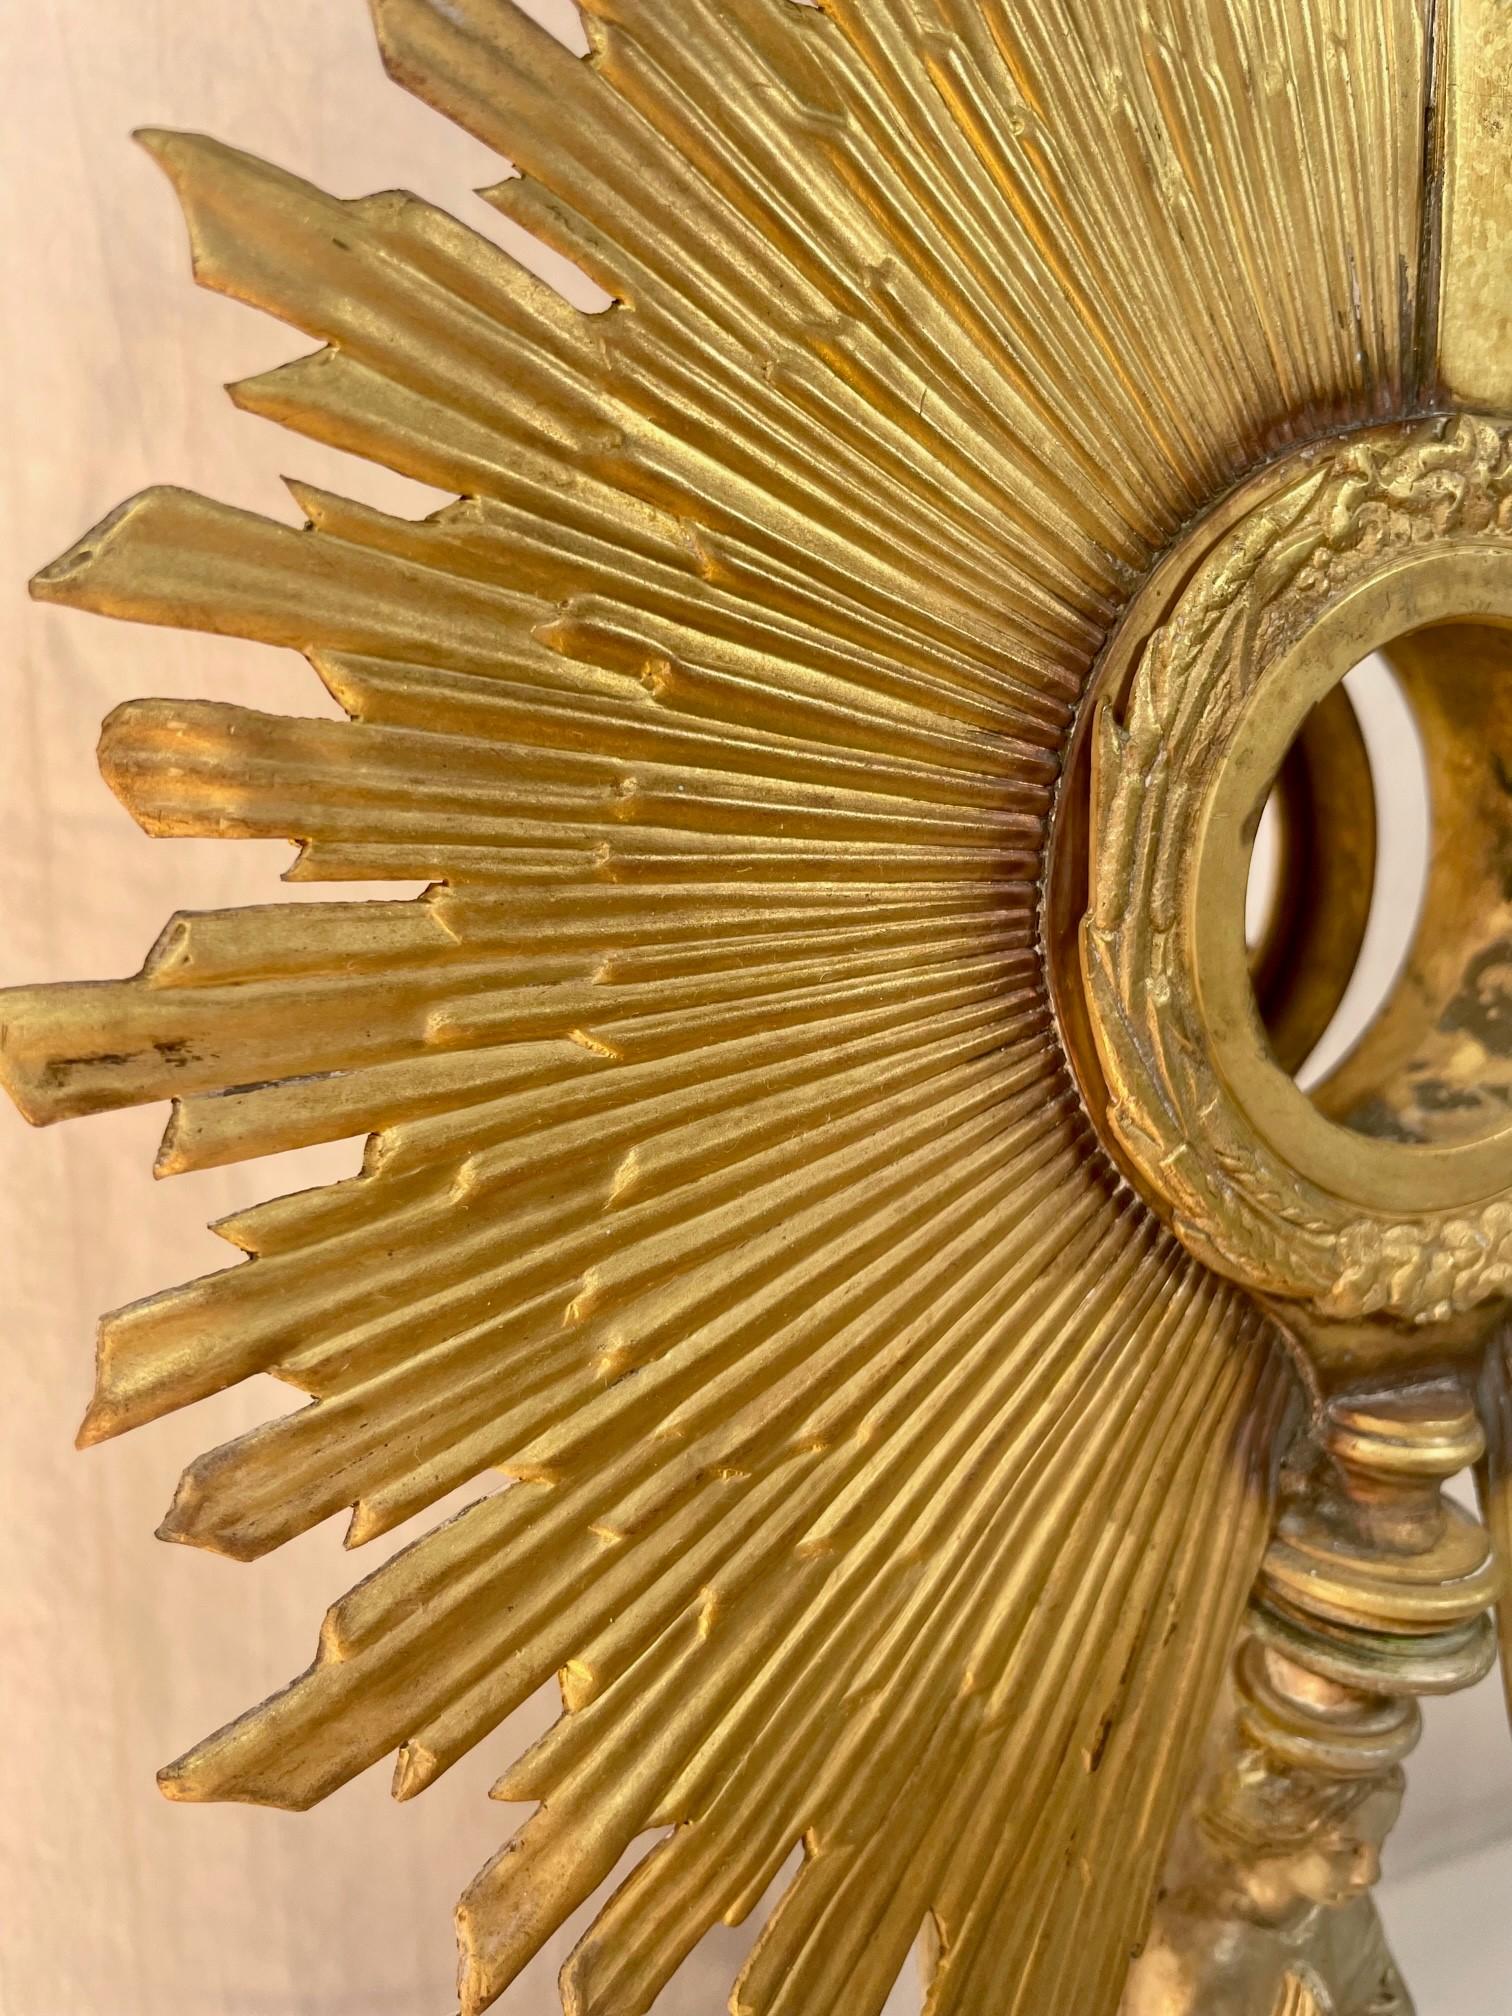 19th century French gilt brass Eucharistic Monstrance with cross and
Wheat Design.

Impressive 19th century gilt brass church reliquary monstrance. Crafted in France, circa 1850, this beautiful golden reliquary is adorned with a glowing sunburst.